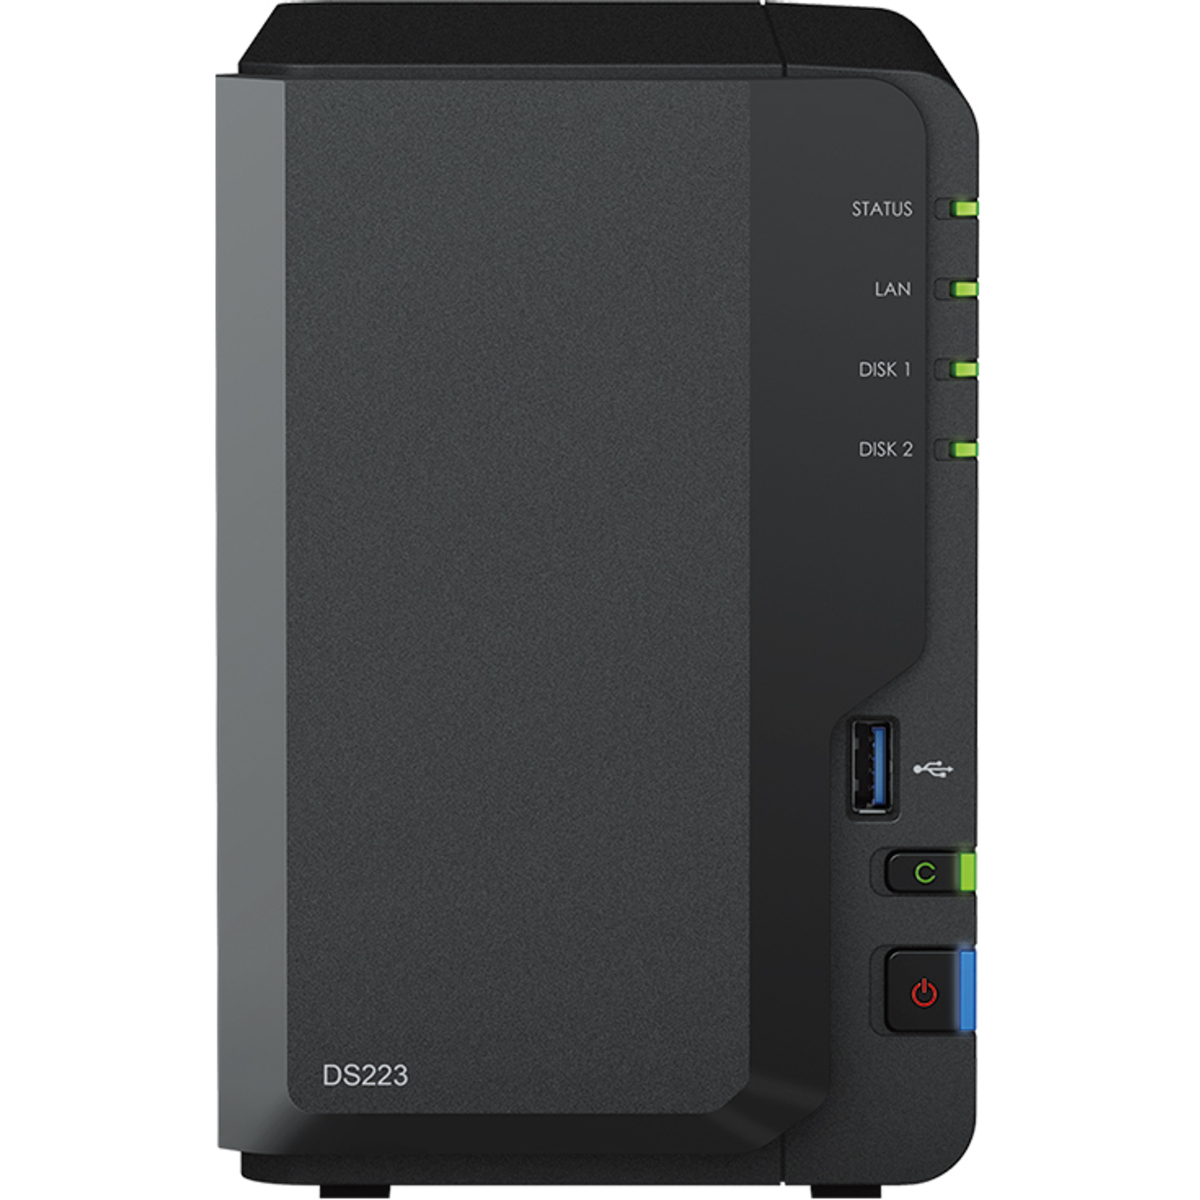 Synology DiskStation DS223 8tb 2-Bay Desktop Personal / Basic Home / Small Office NAS - Network Attached Storage Device 1x8tb Western Digital Gold WD8004FRYZ 3.5 7200rpm SATA 6Gb/s HDD ENTERPRISE Class Drives Installed - Burn-In Tested DiskStation DS223